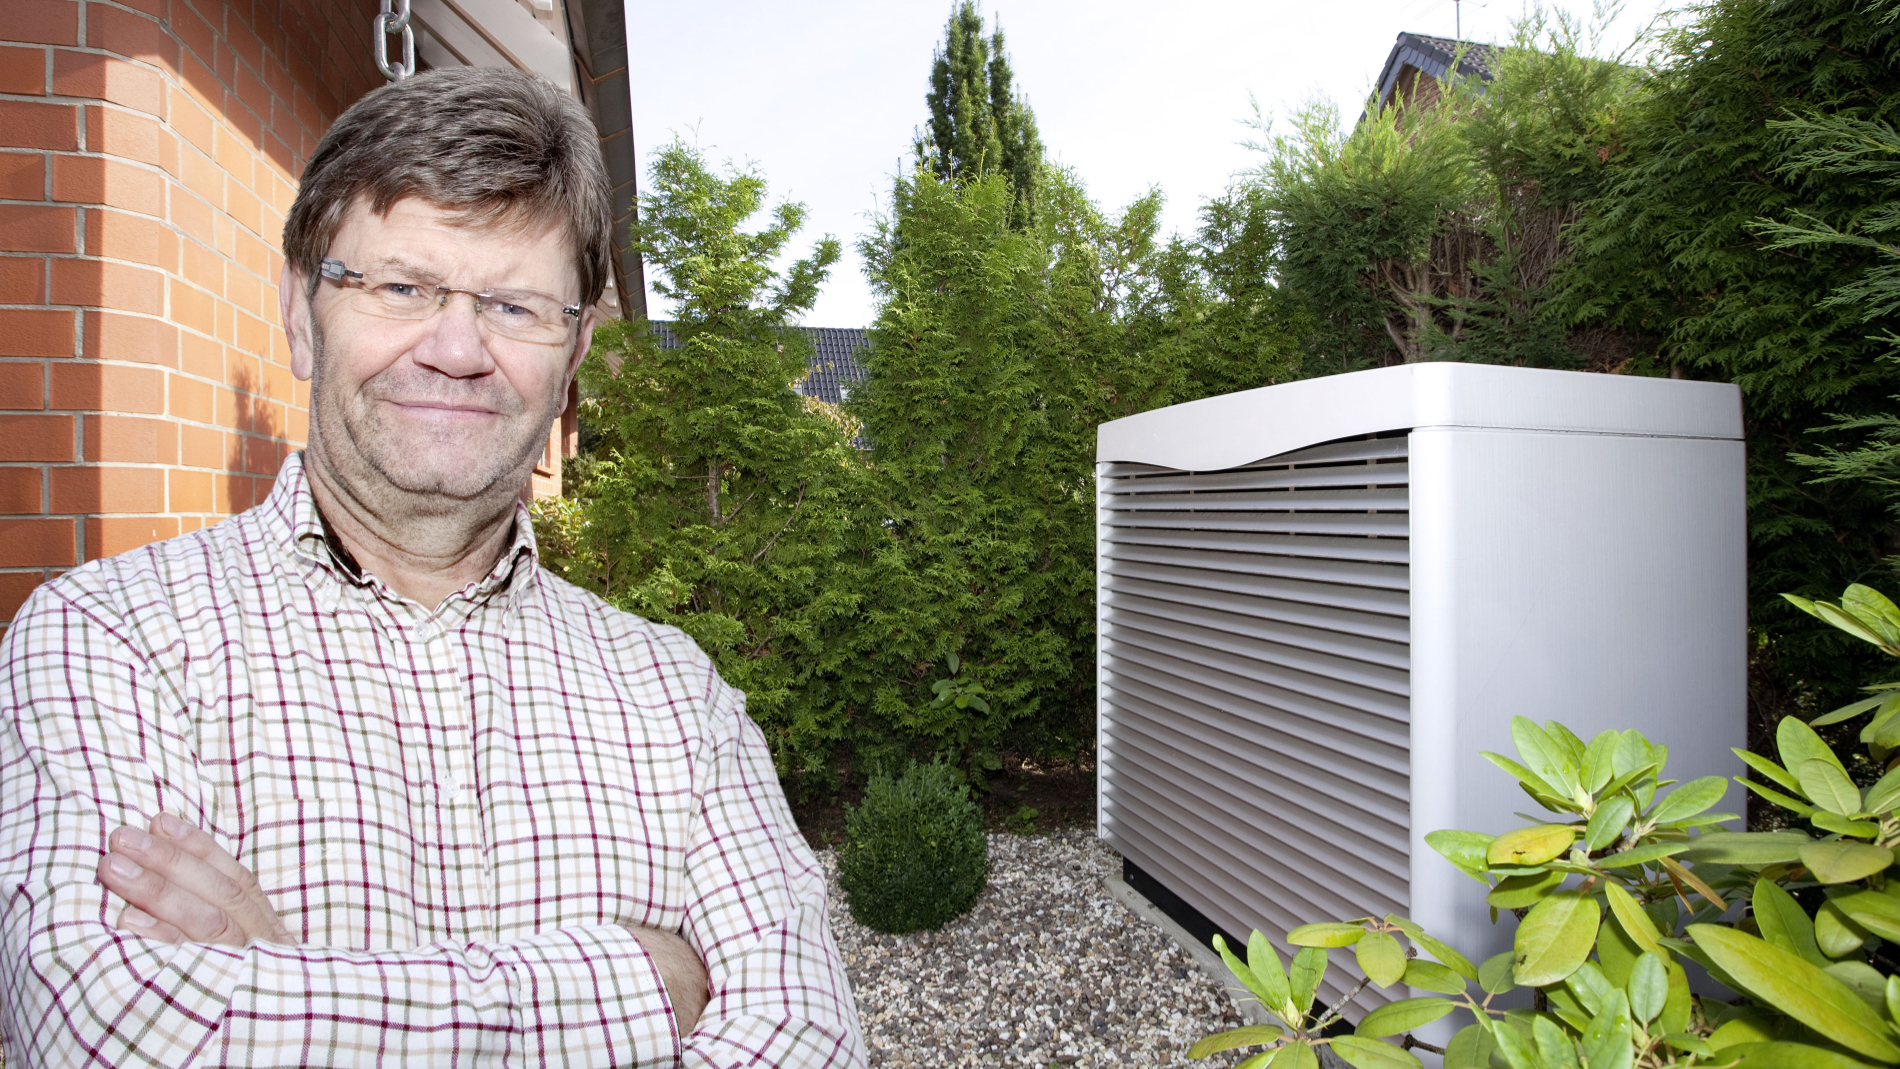 Man in front of a heat pump